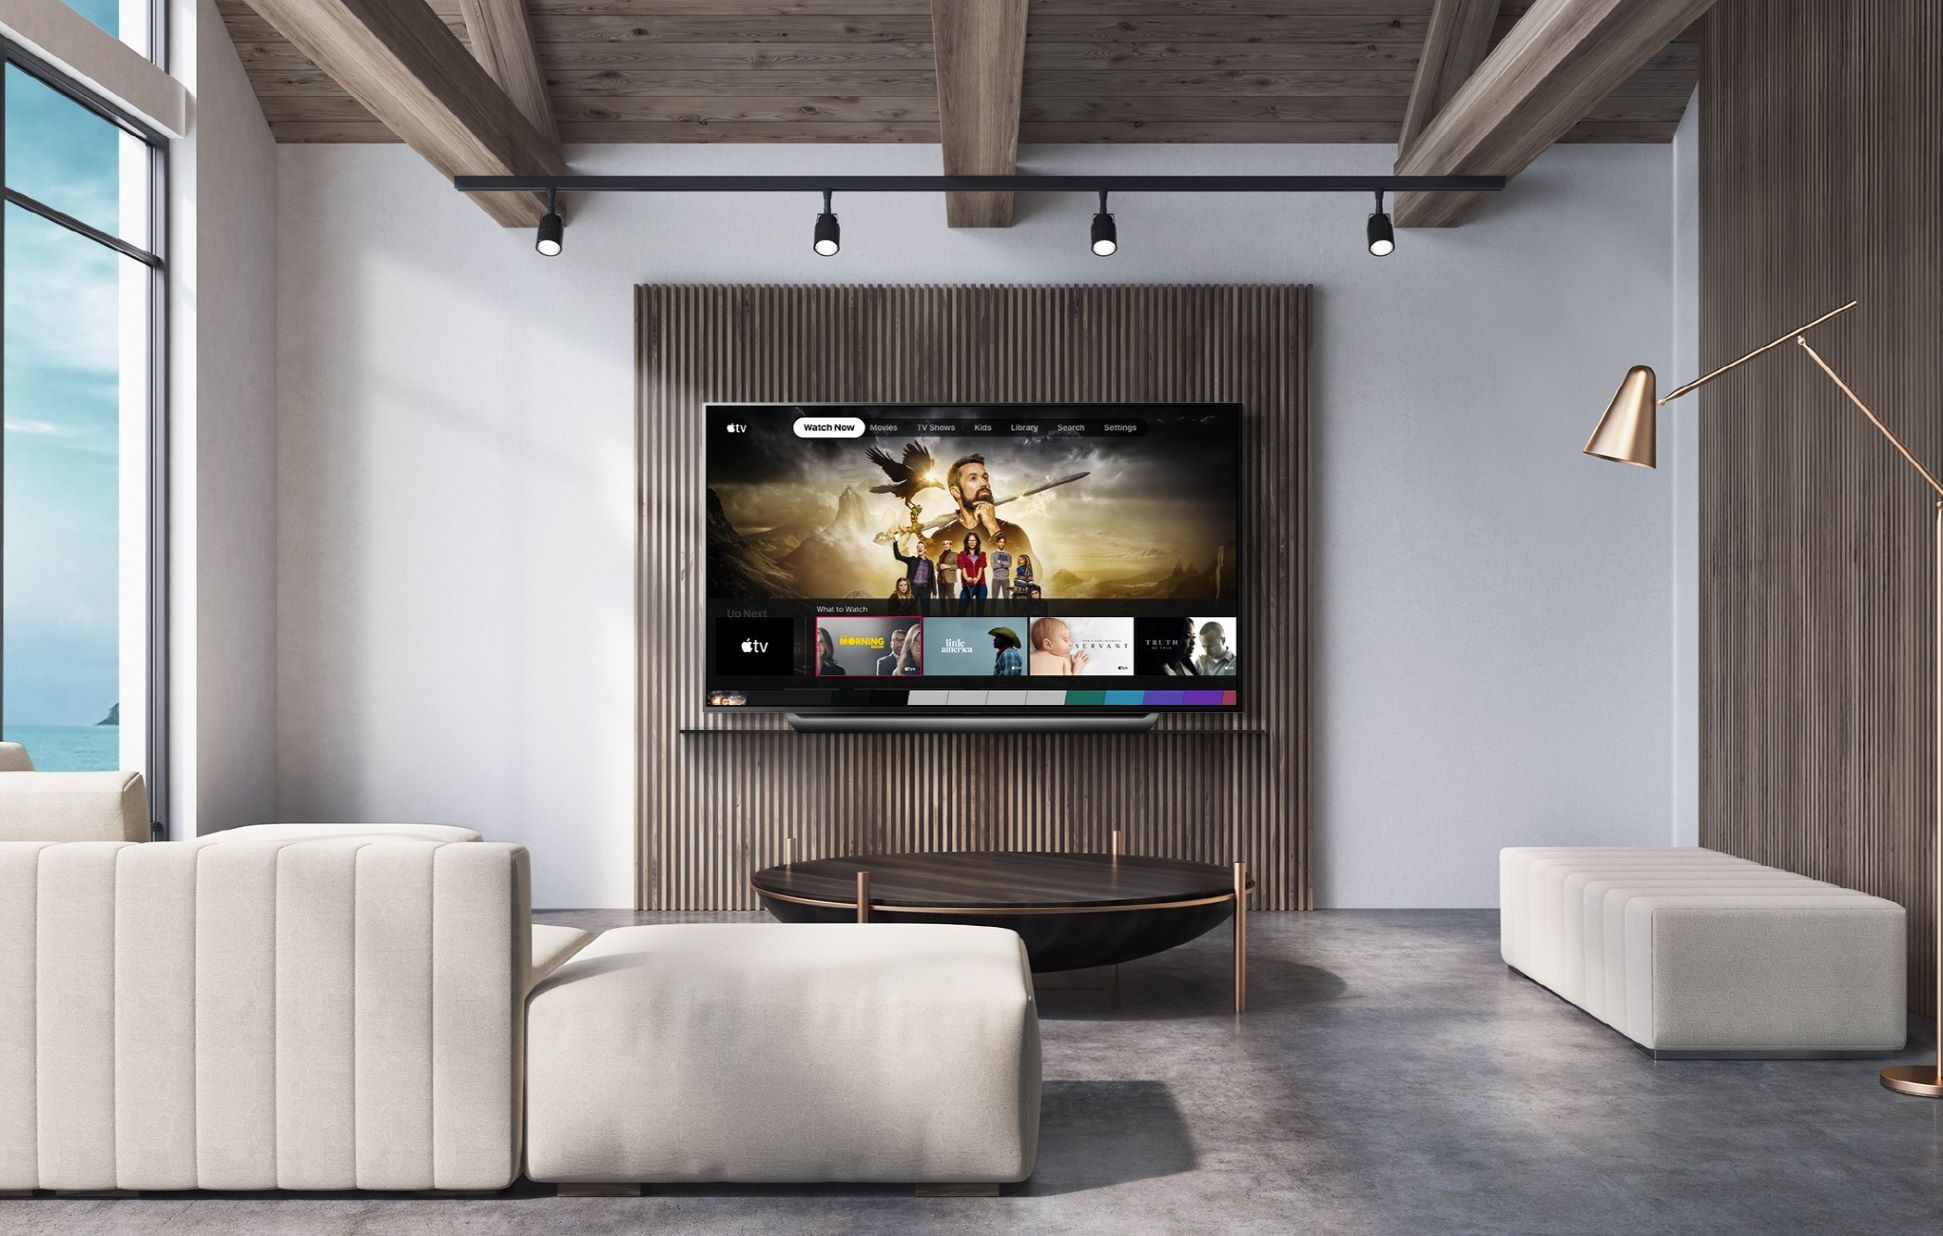 How To Watch Apple TV On LG TV